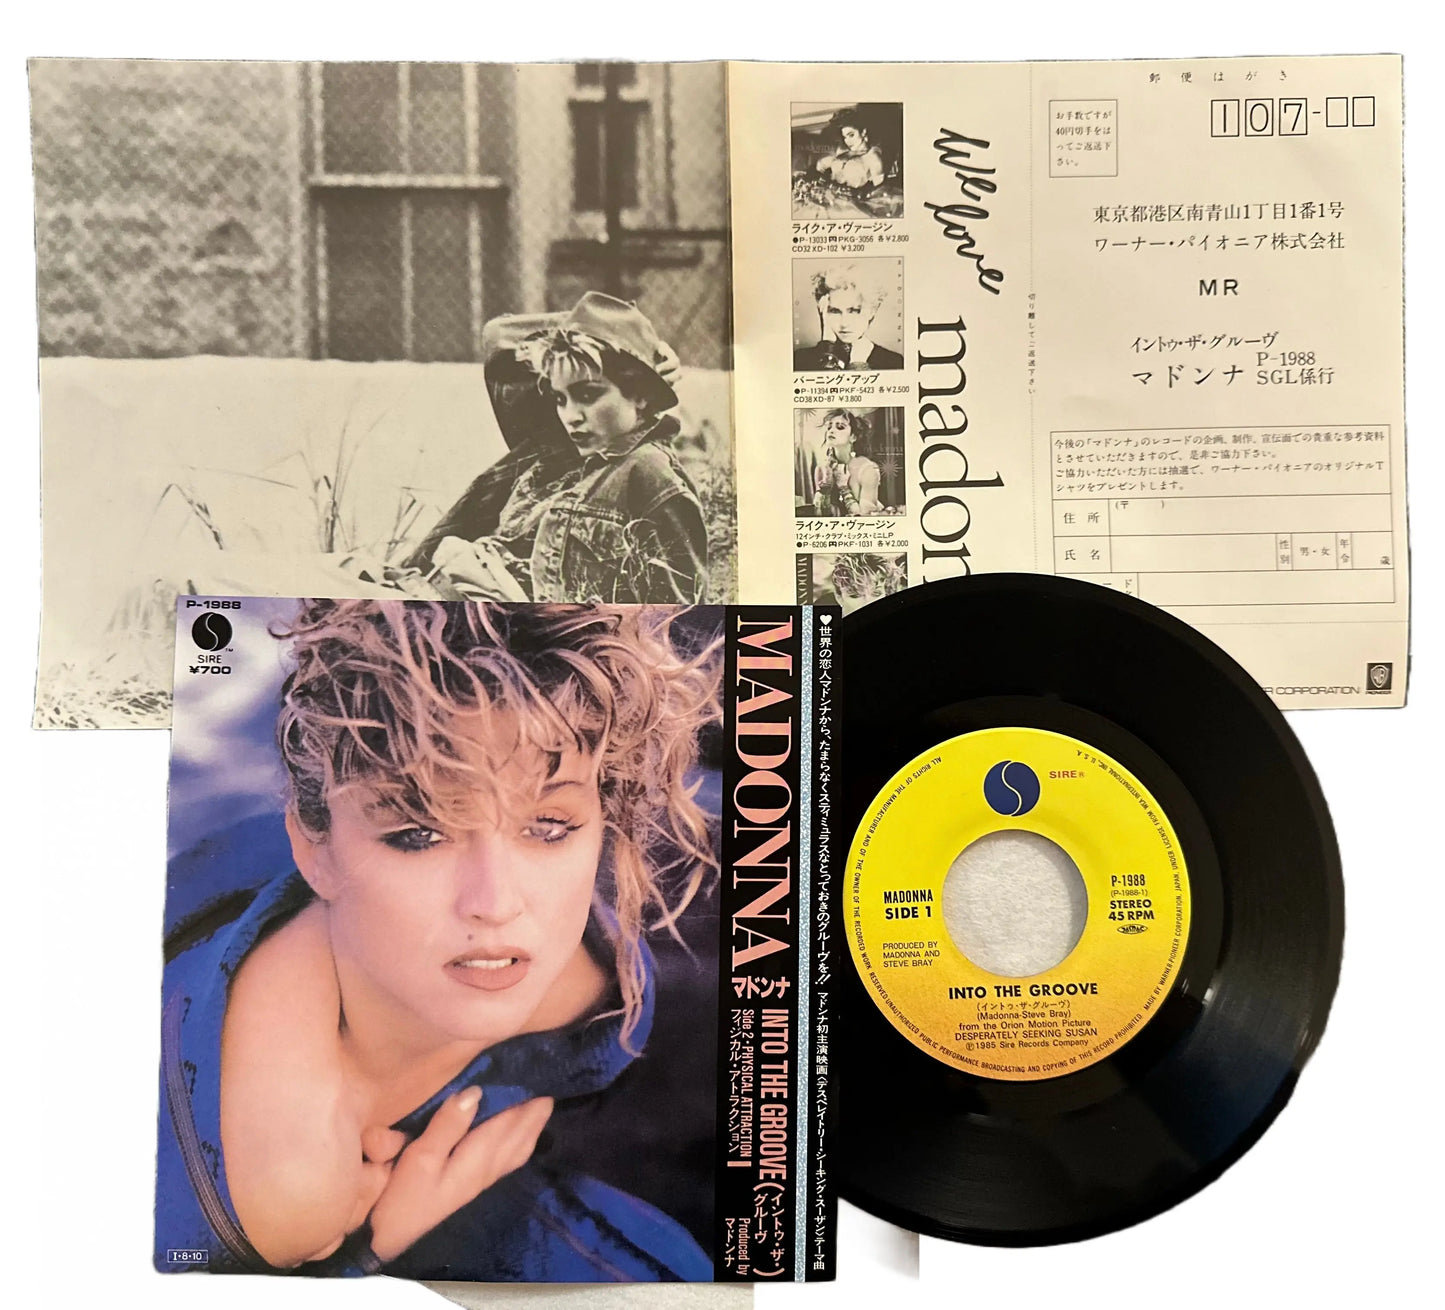 Madonna - Into The Groove [Japanese 45 rpm 7" Single LP]